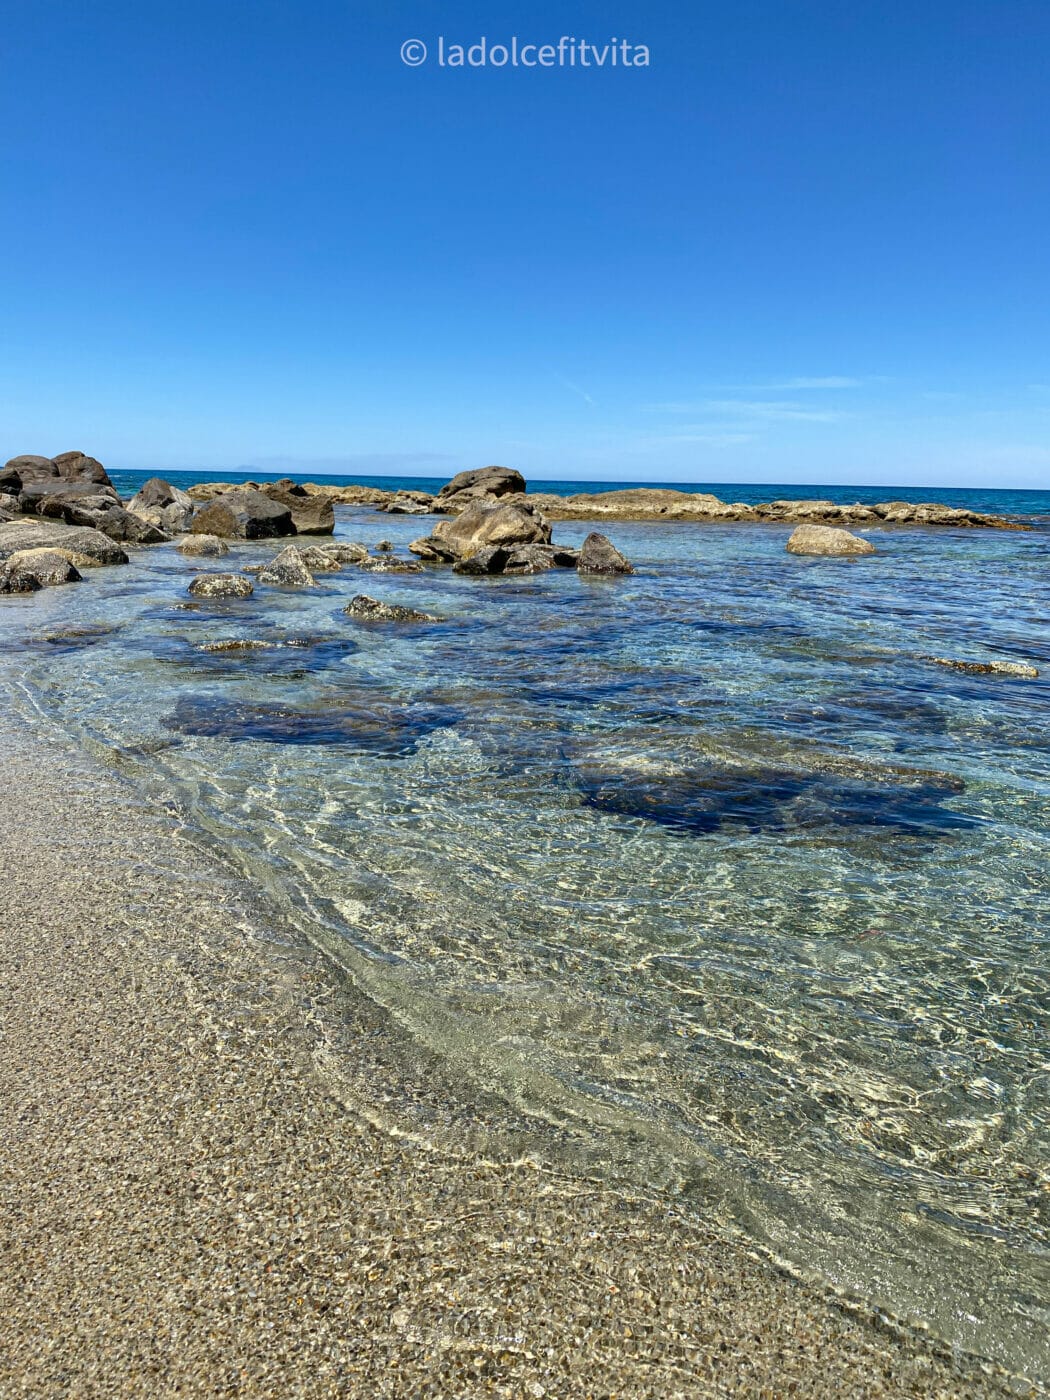 crystalline waters from the shore of Piedigrotta Beach in Pizzo Calabria